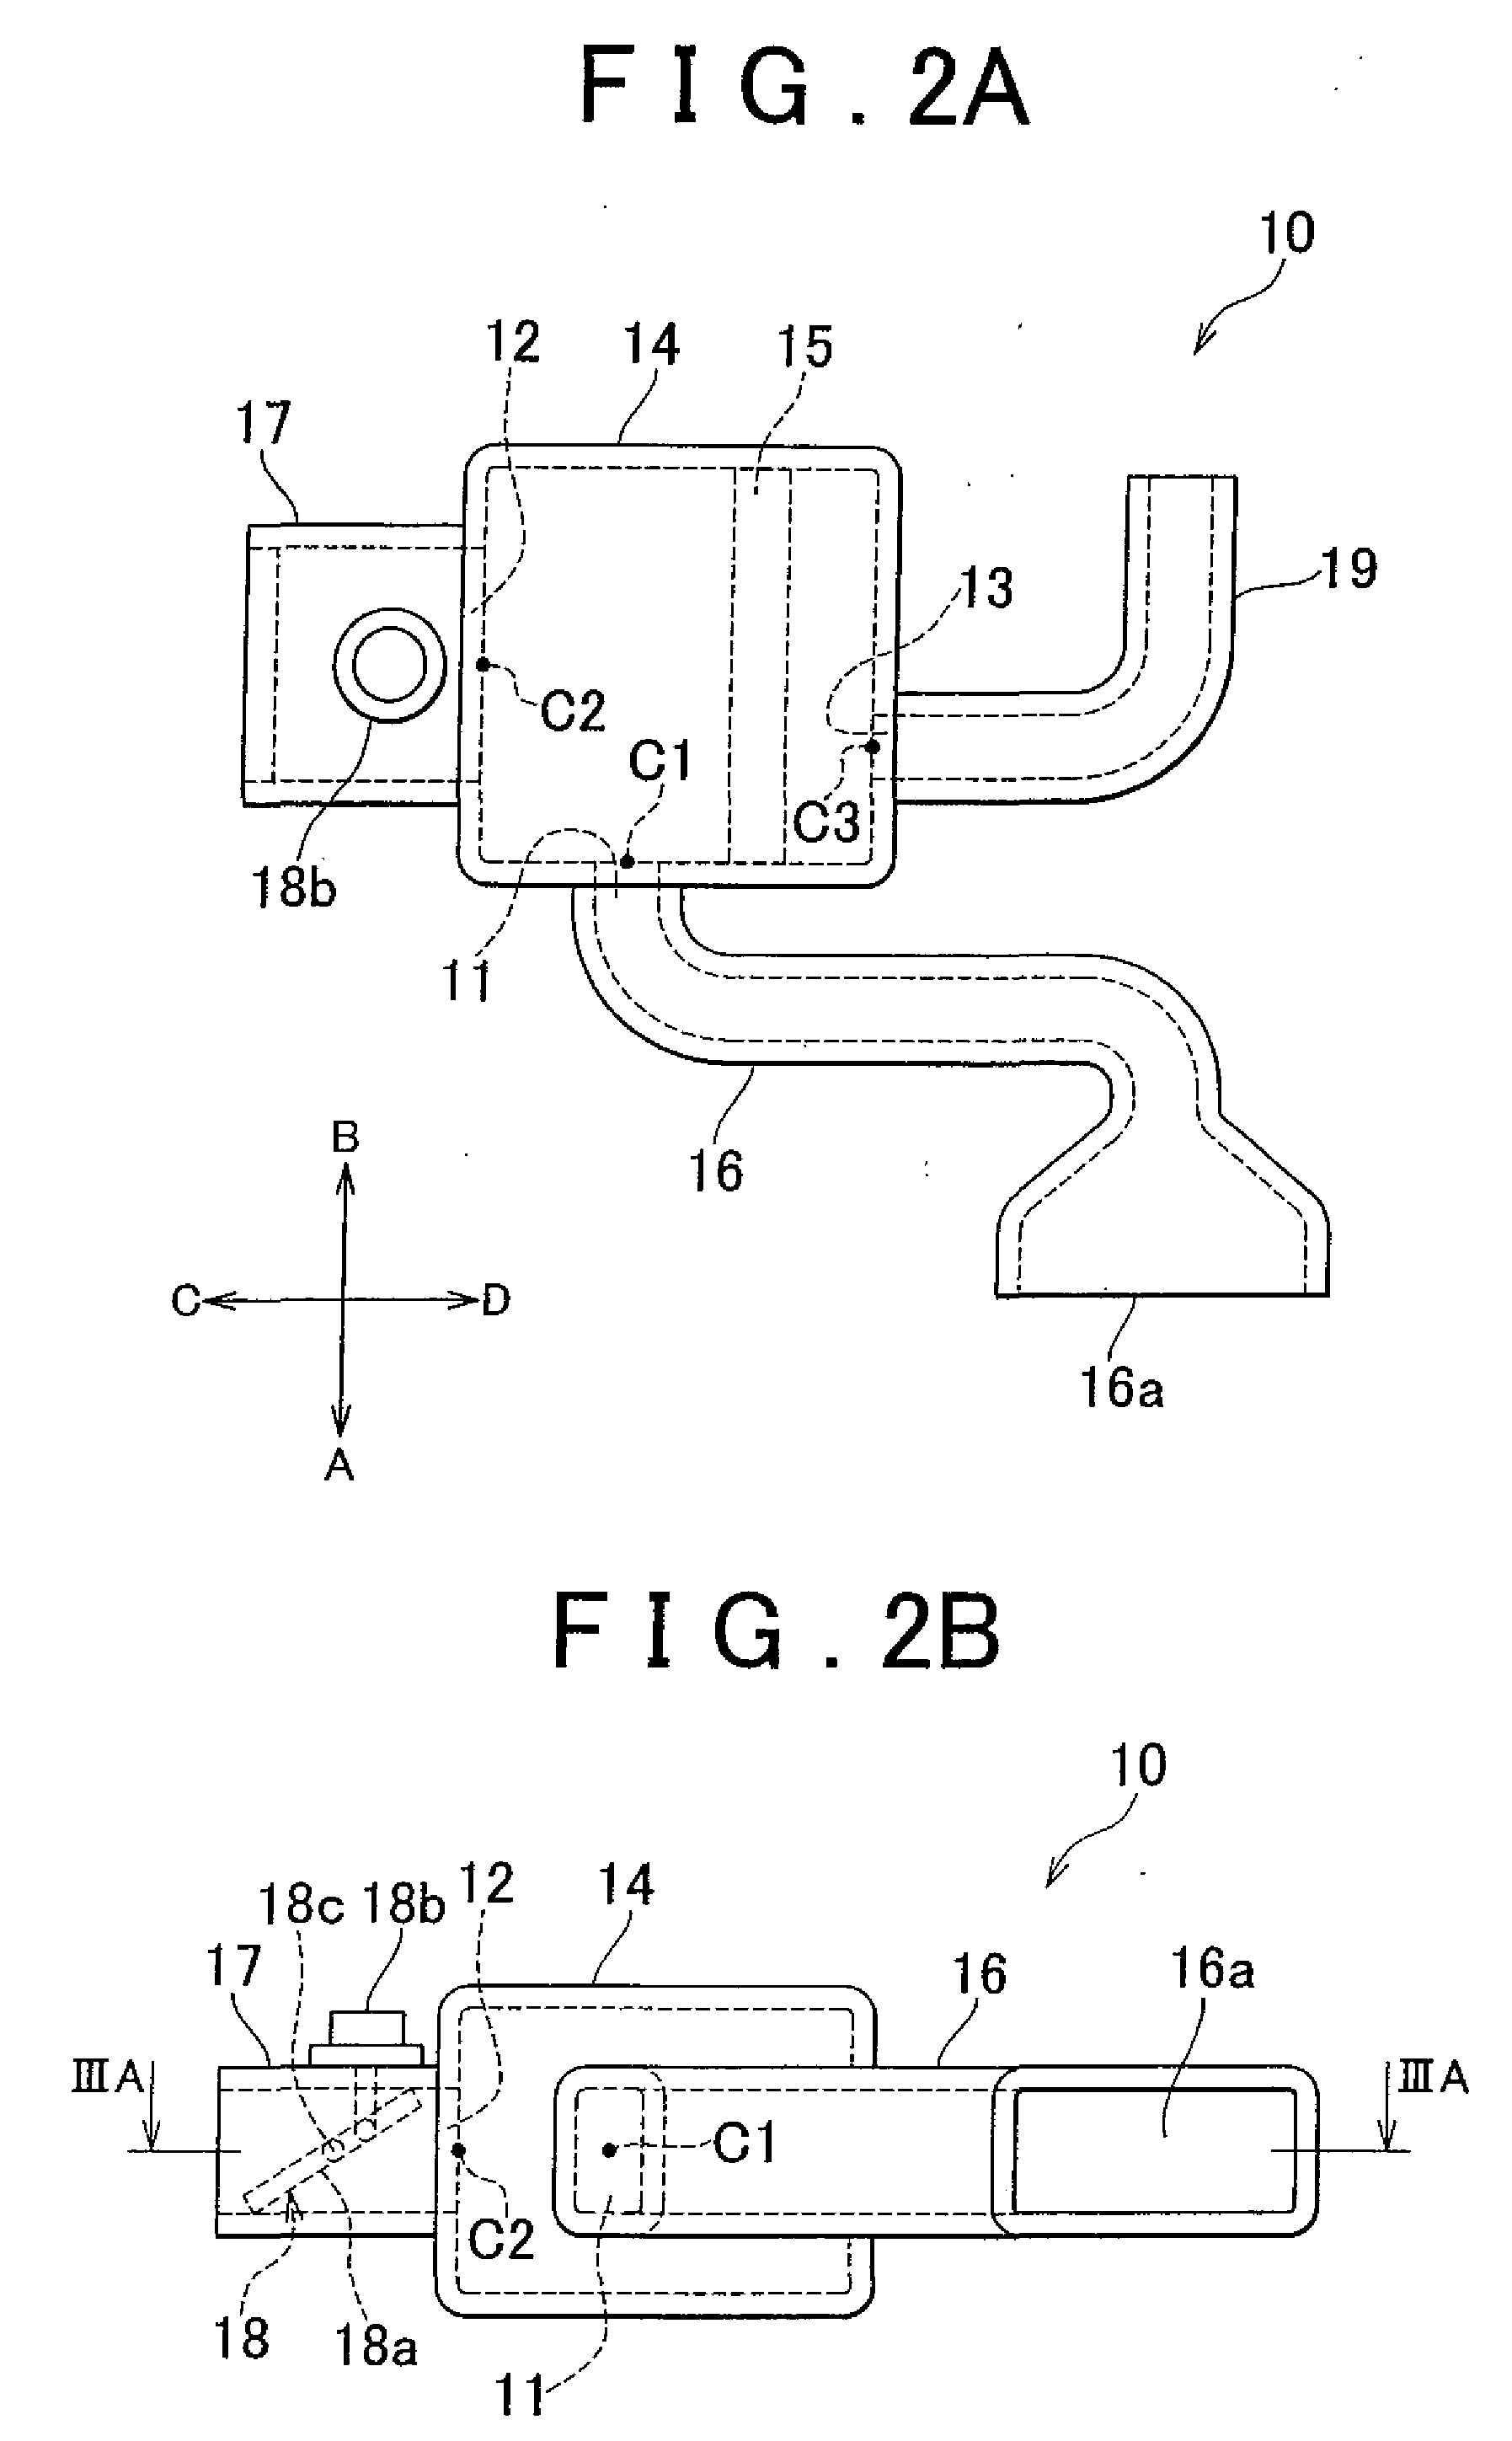 Intake system for vehicle internal combustion engine